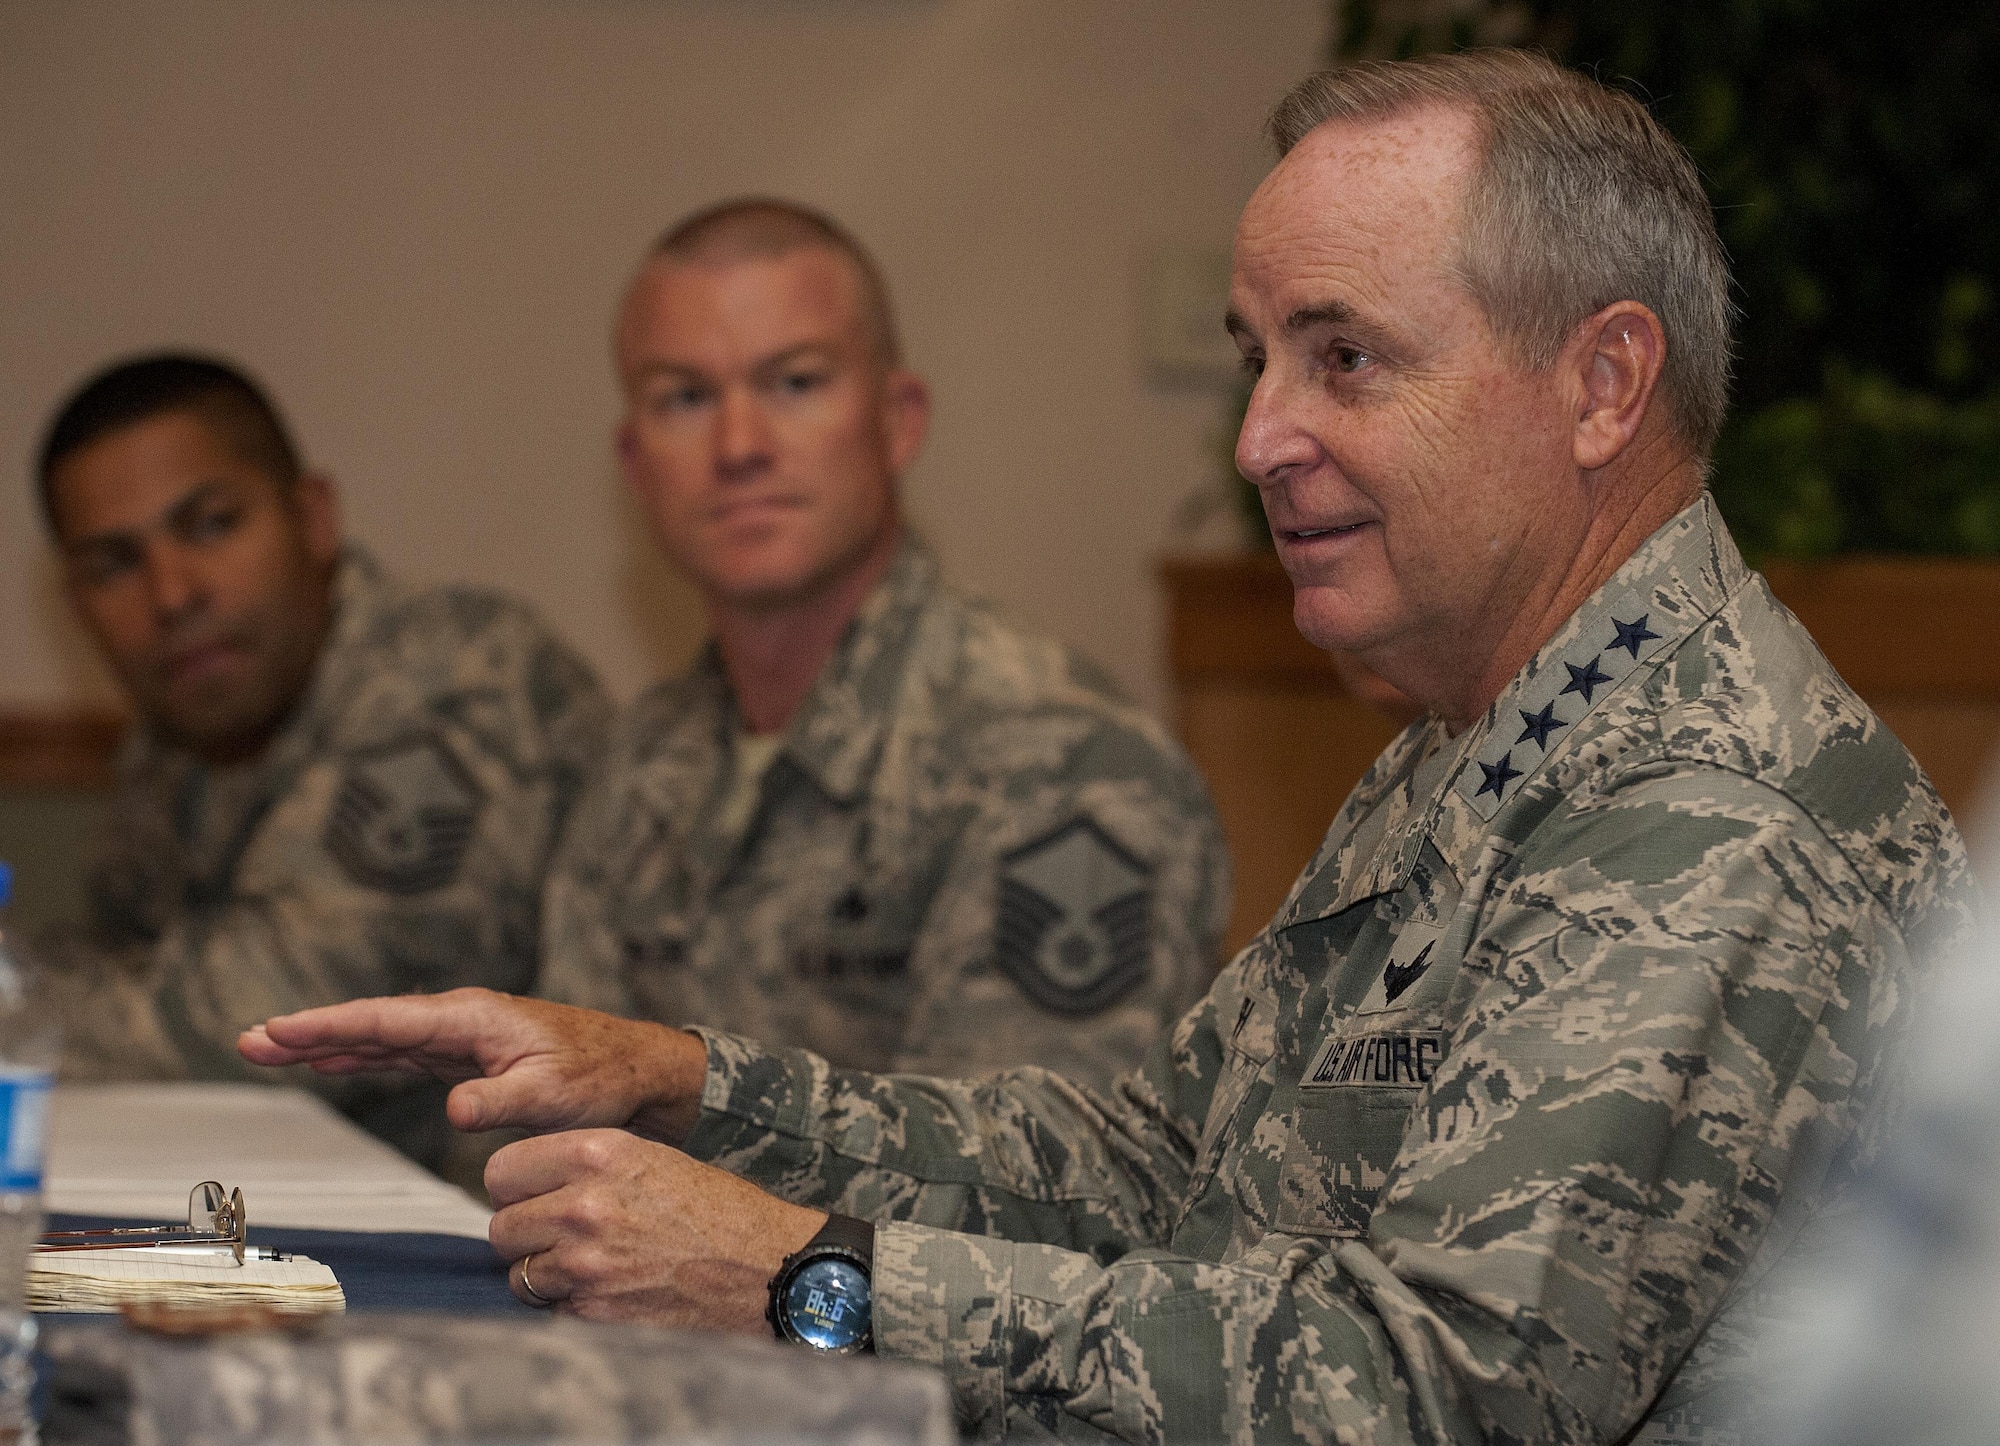 Air Force Chief of Staff Gen. Mark A. Welsh III talks with Airmen during a visit to the 5th Bomb Wing and 91st Missile Wing at Minot Air Force Base, N.D., Aug. 5, 2015.  While visiting the base, Welsh met with 5th Bomb Wing and 91st Missile Wing maintainers, members of security force units and senior staff in an effort to gain perspective on the current status of the nuclear enterprise. (U.S. Air Force photo/Senior Airman Stephanie Morris)